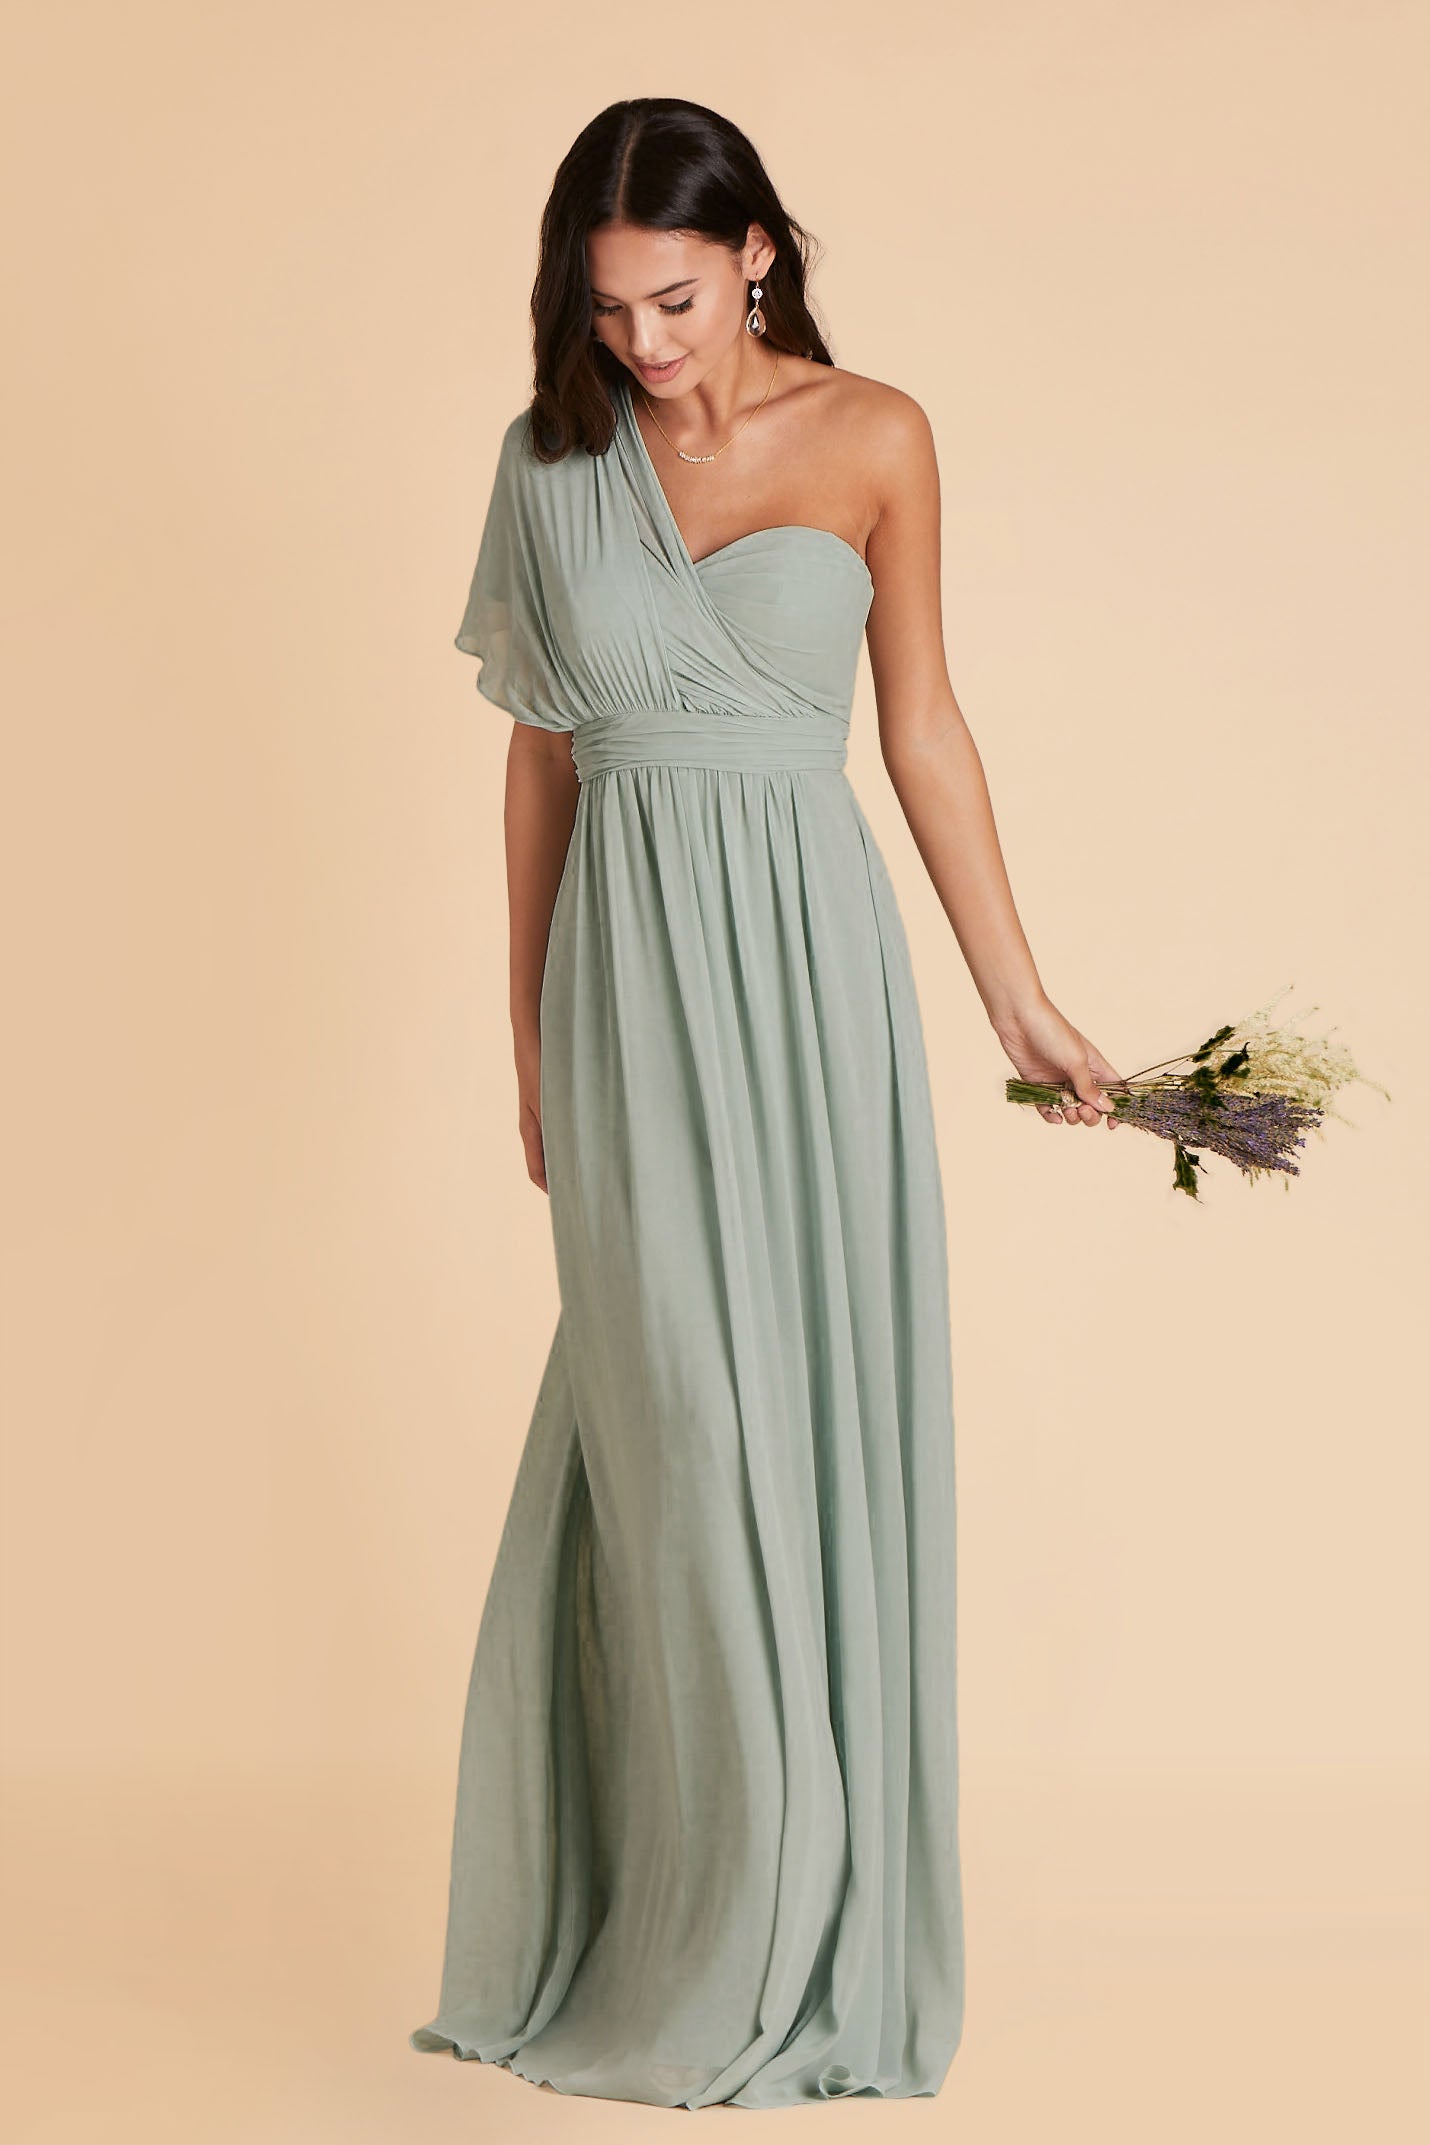 Front view of the Grace Convertible Dress in sage chiffon worn by a slender model with a medium skin tone. Front streamers are pulled over the right shoulder and fanned out wide, draping over the shoulder for an elegant asymmetrical look